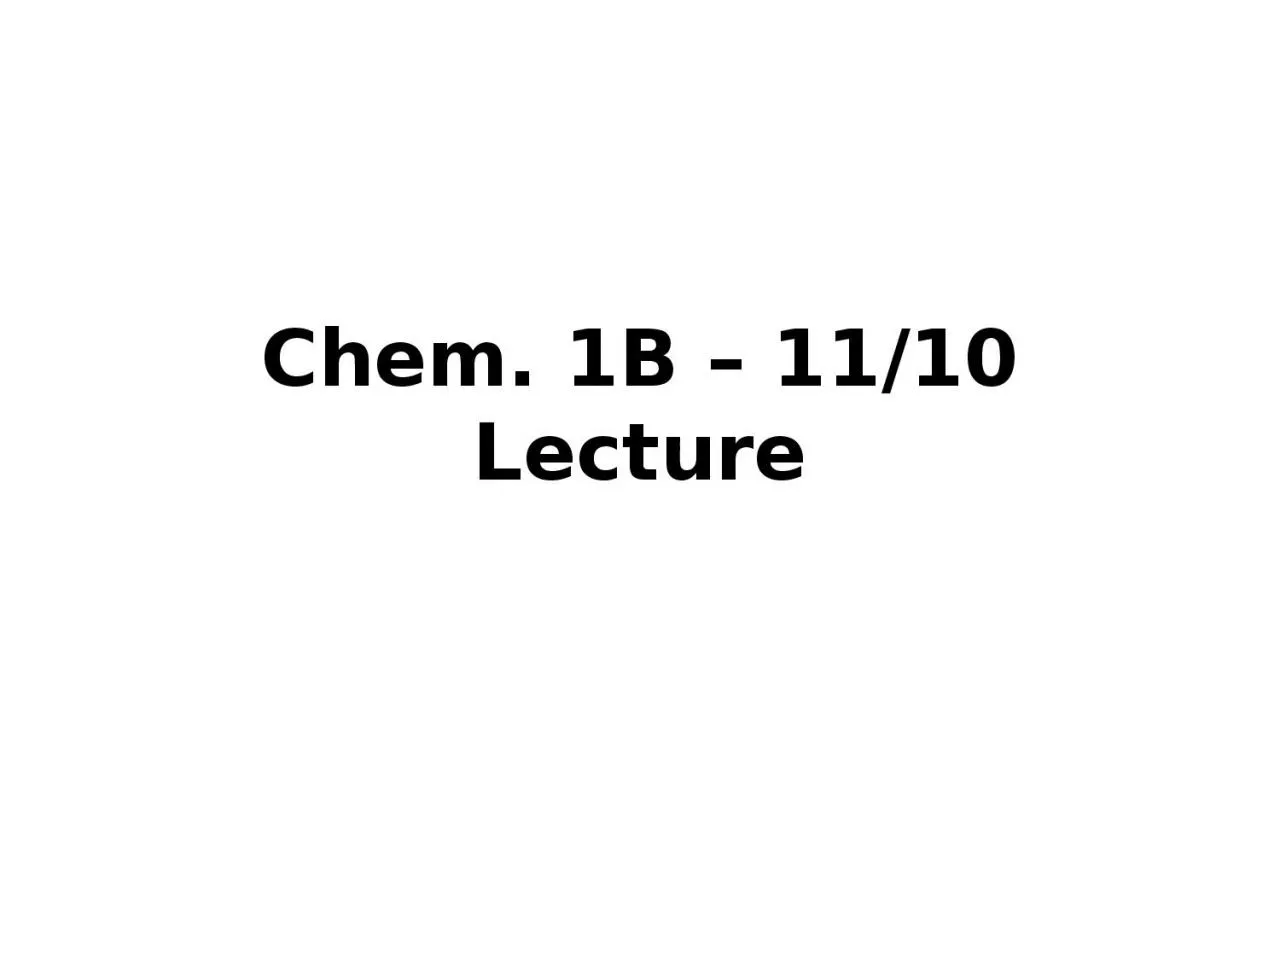 Chem. 1B – 11/10 Lecture